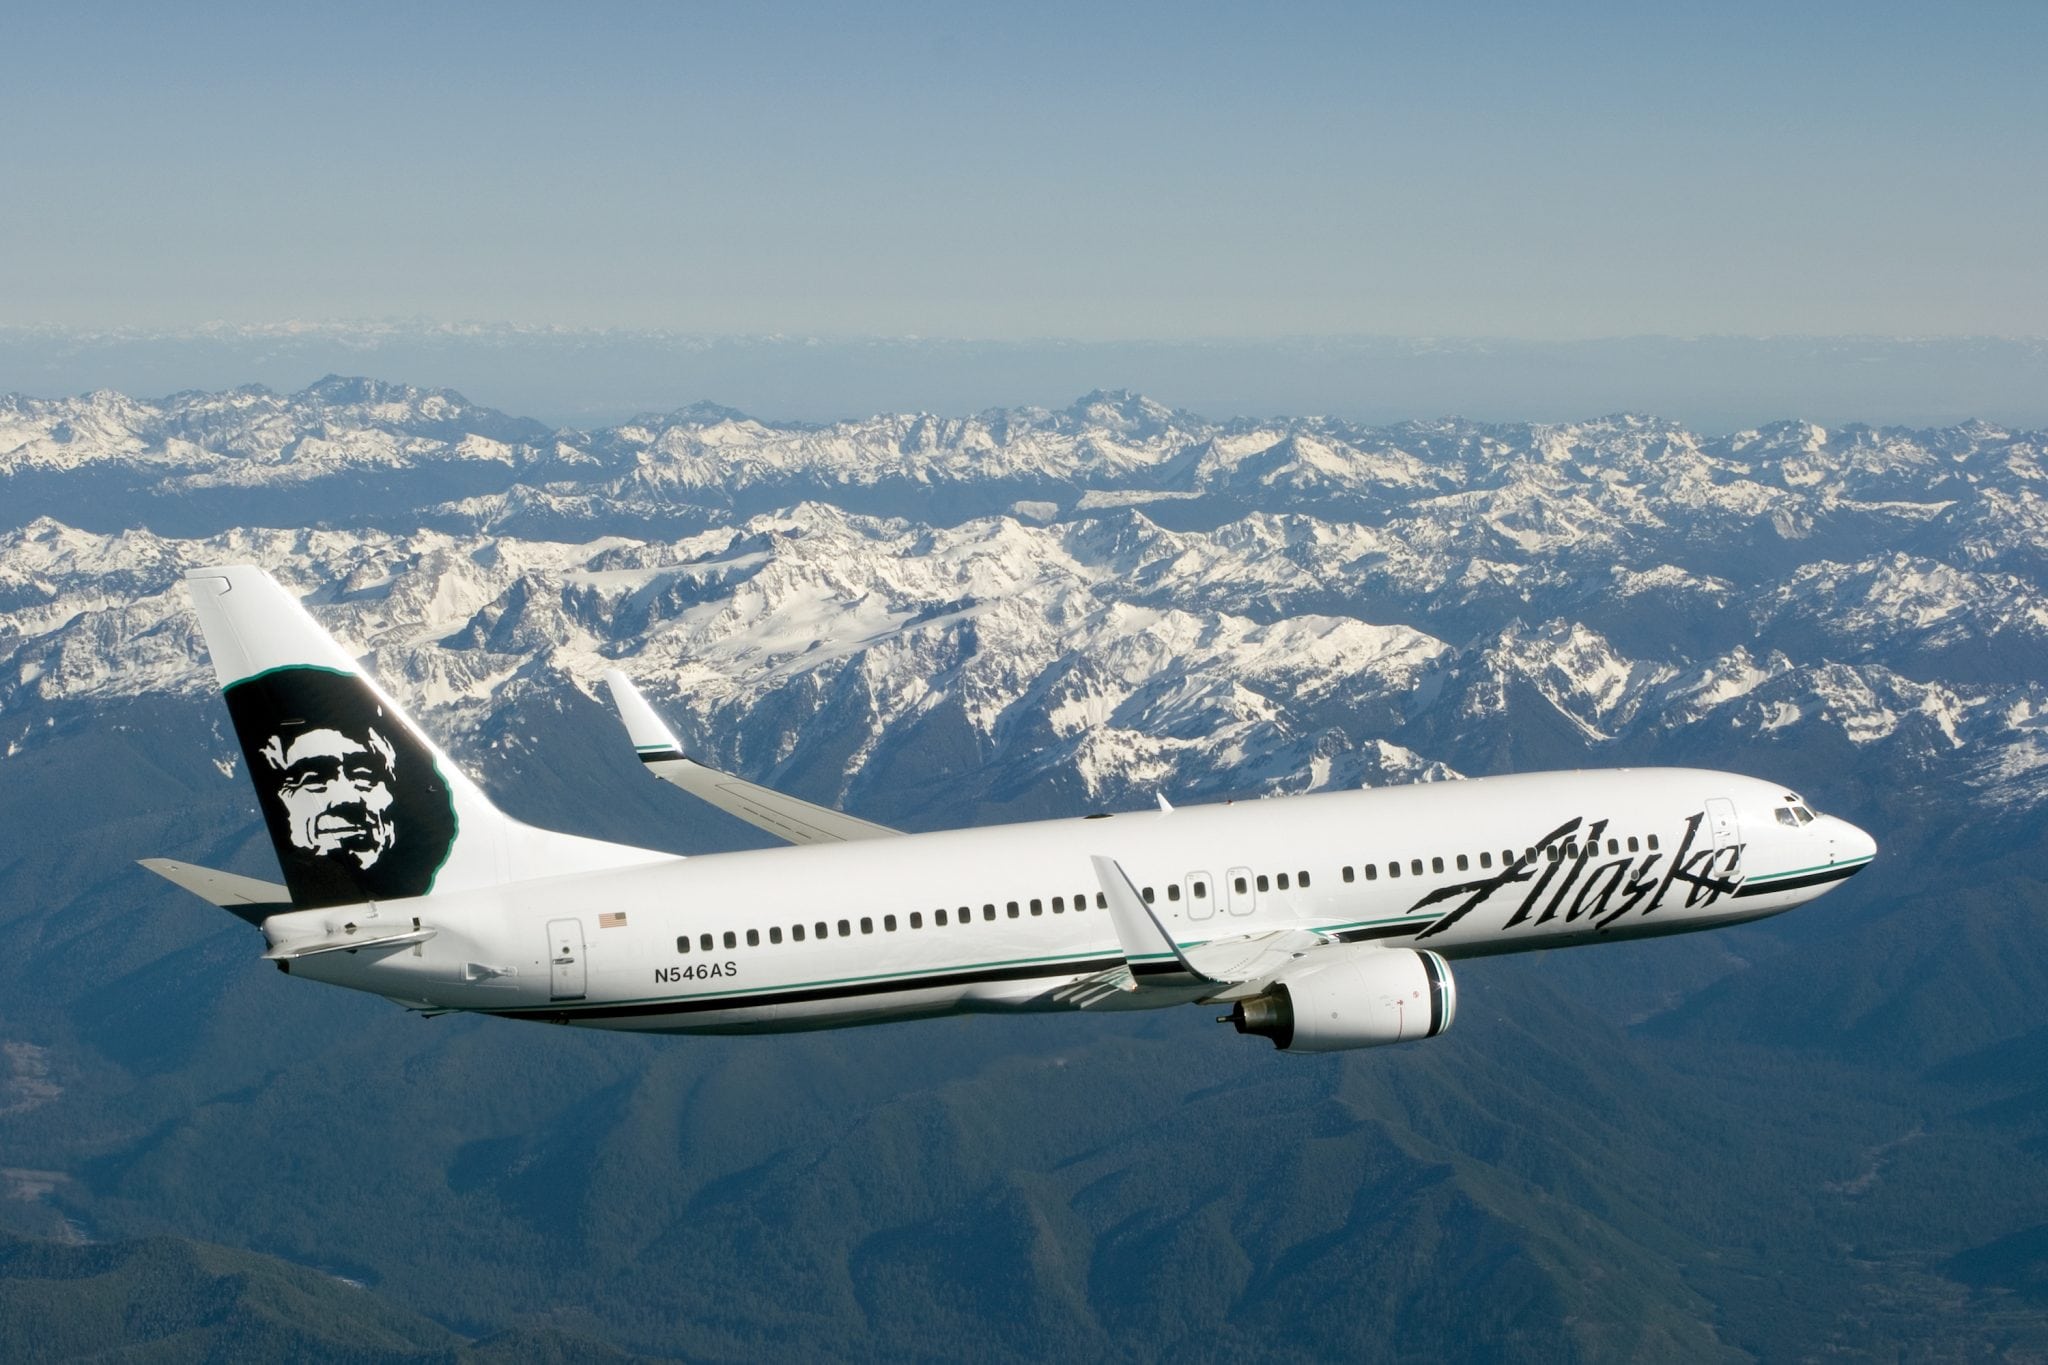 Alaska Airlines has seen an increase in yearly traffic